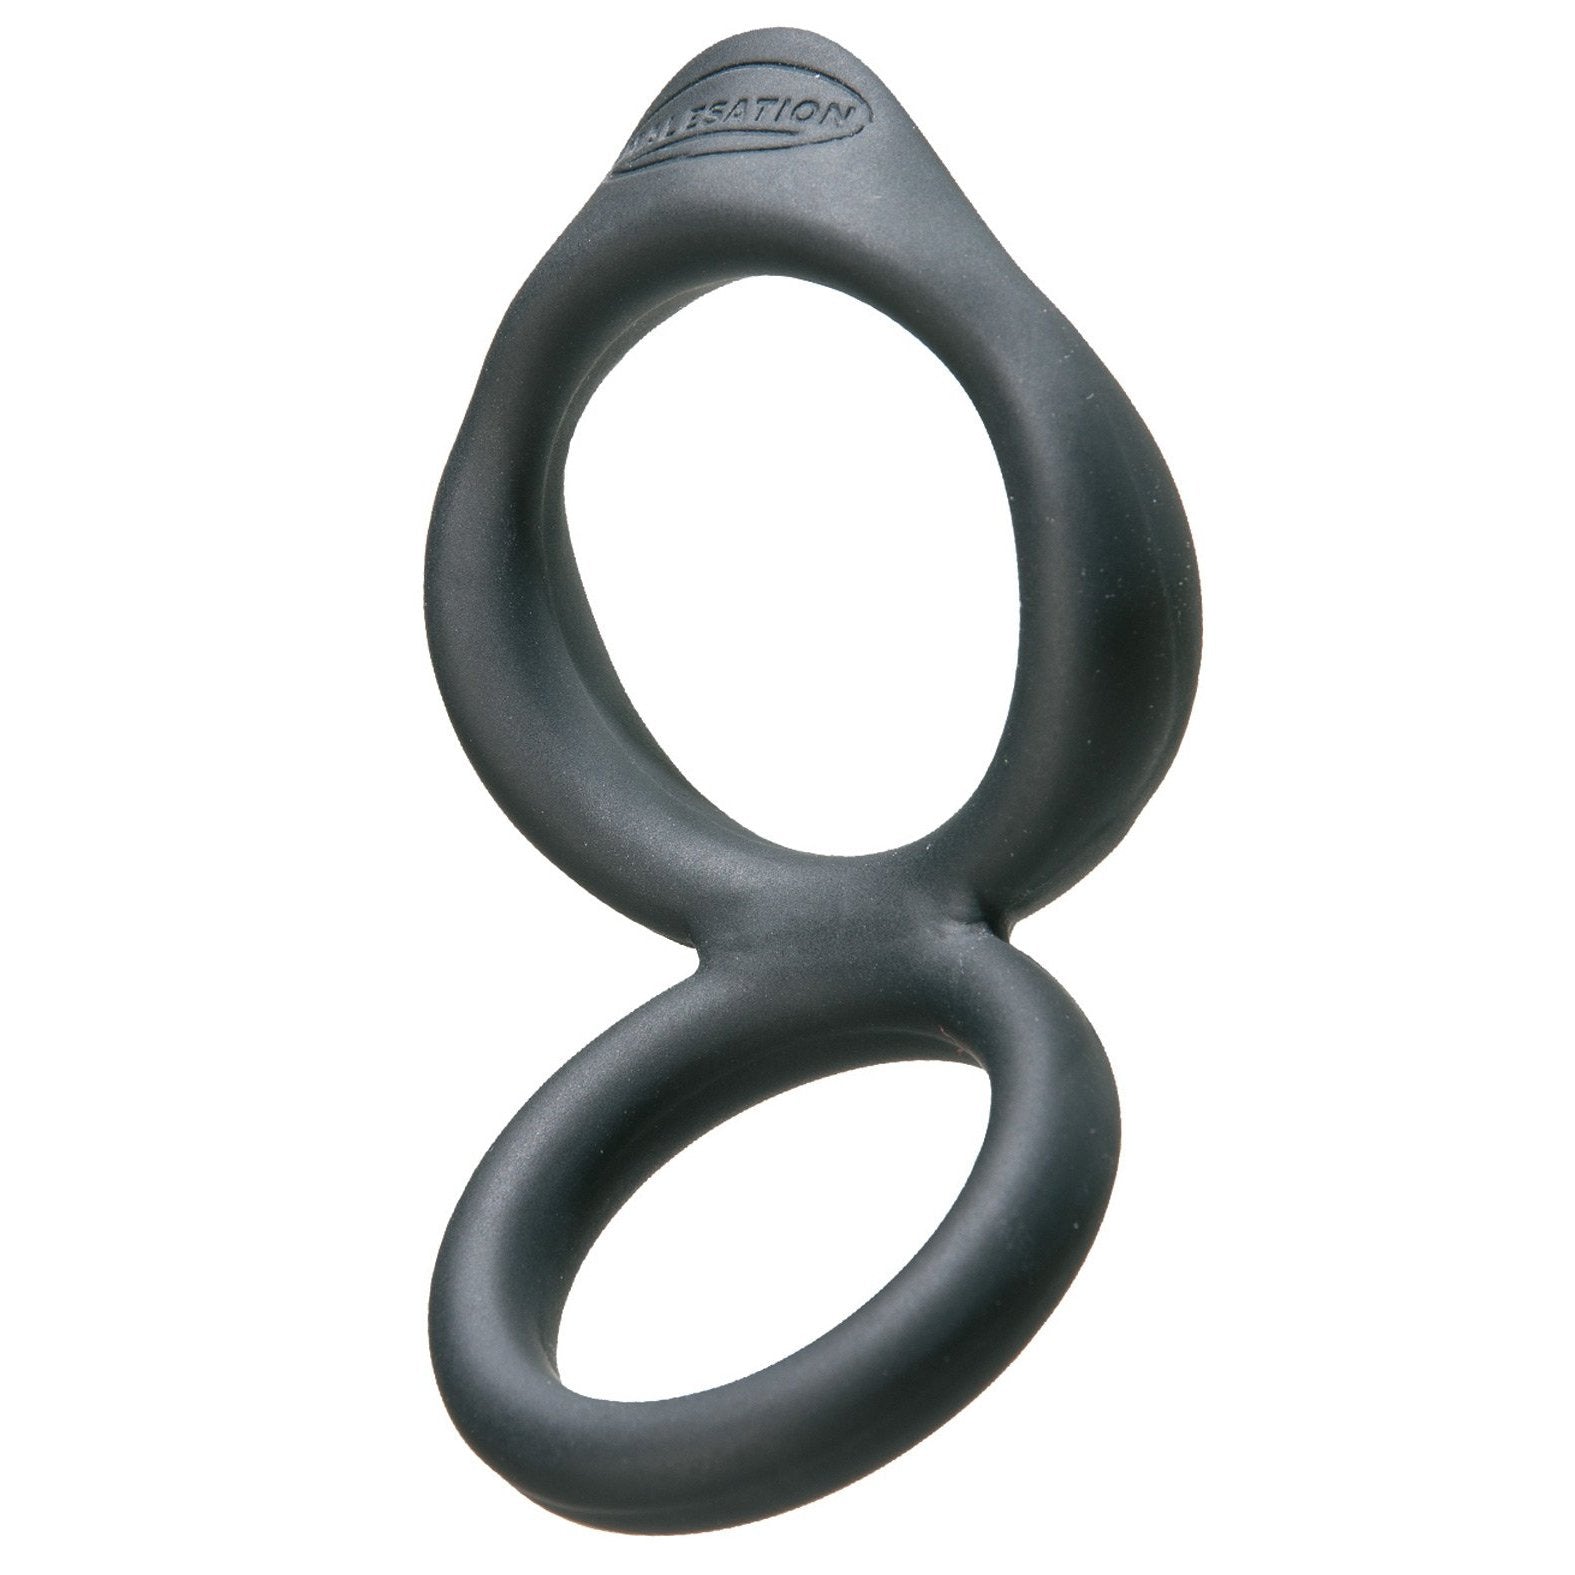 Malesation Force Silicone Double Cock Ring